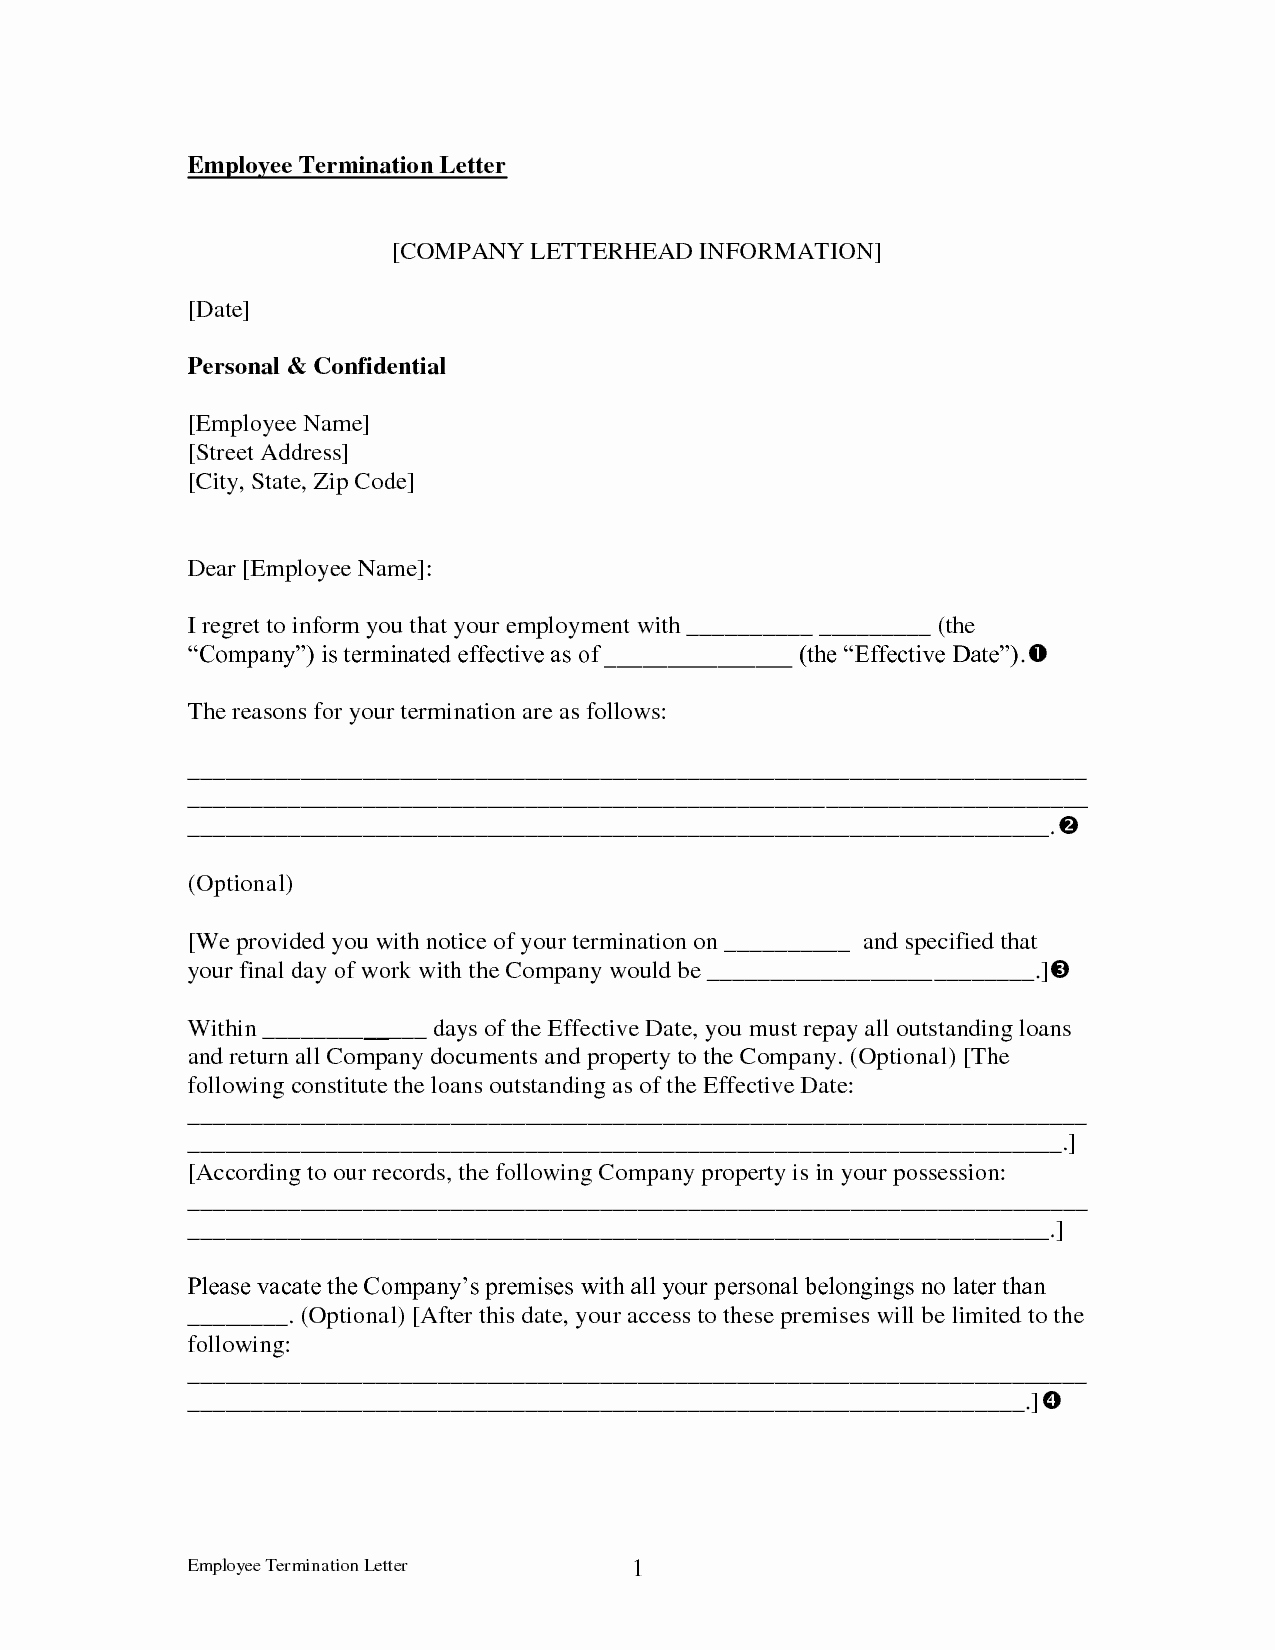 Employee Termination Letter Sample Best Of 19 Termination Letter Samples Writing Letters formats